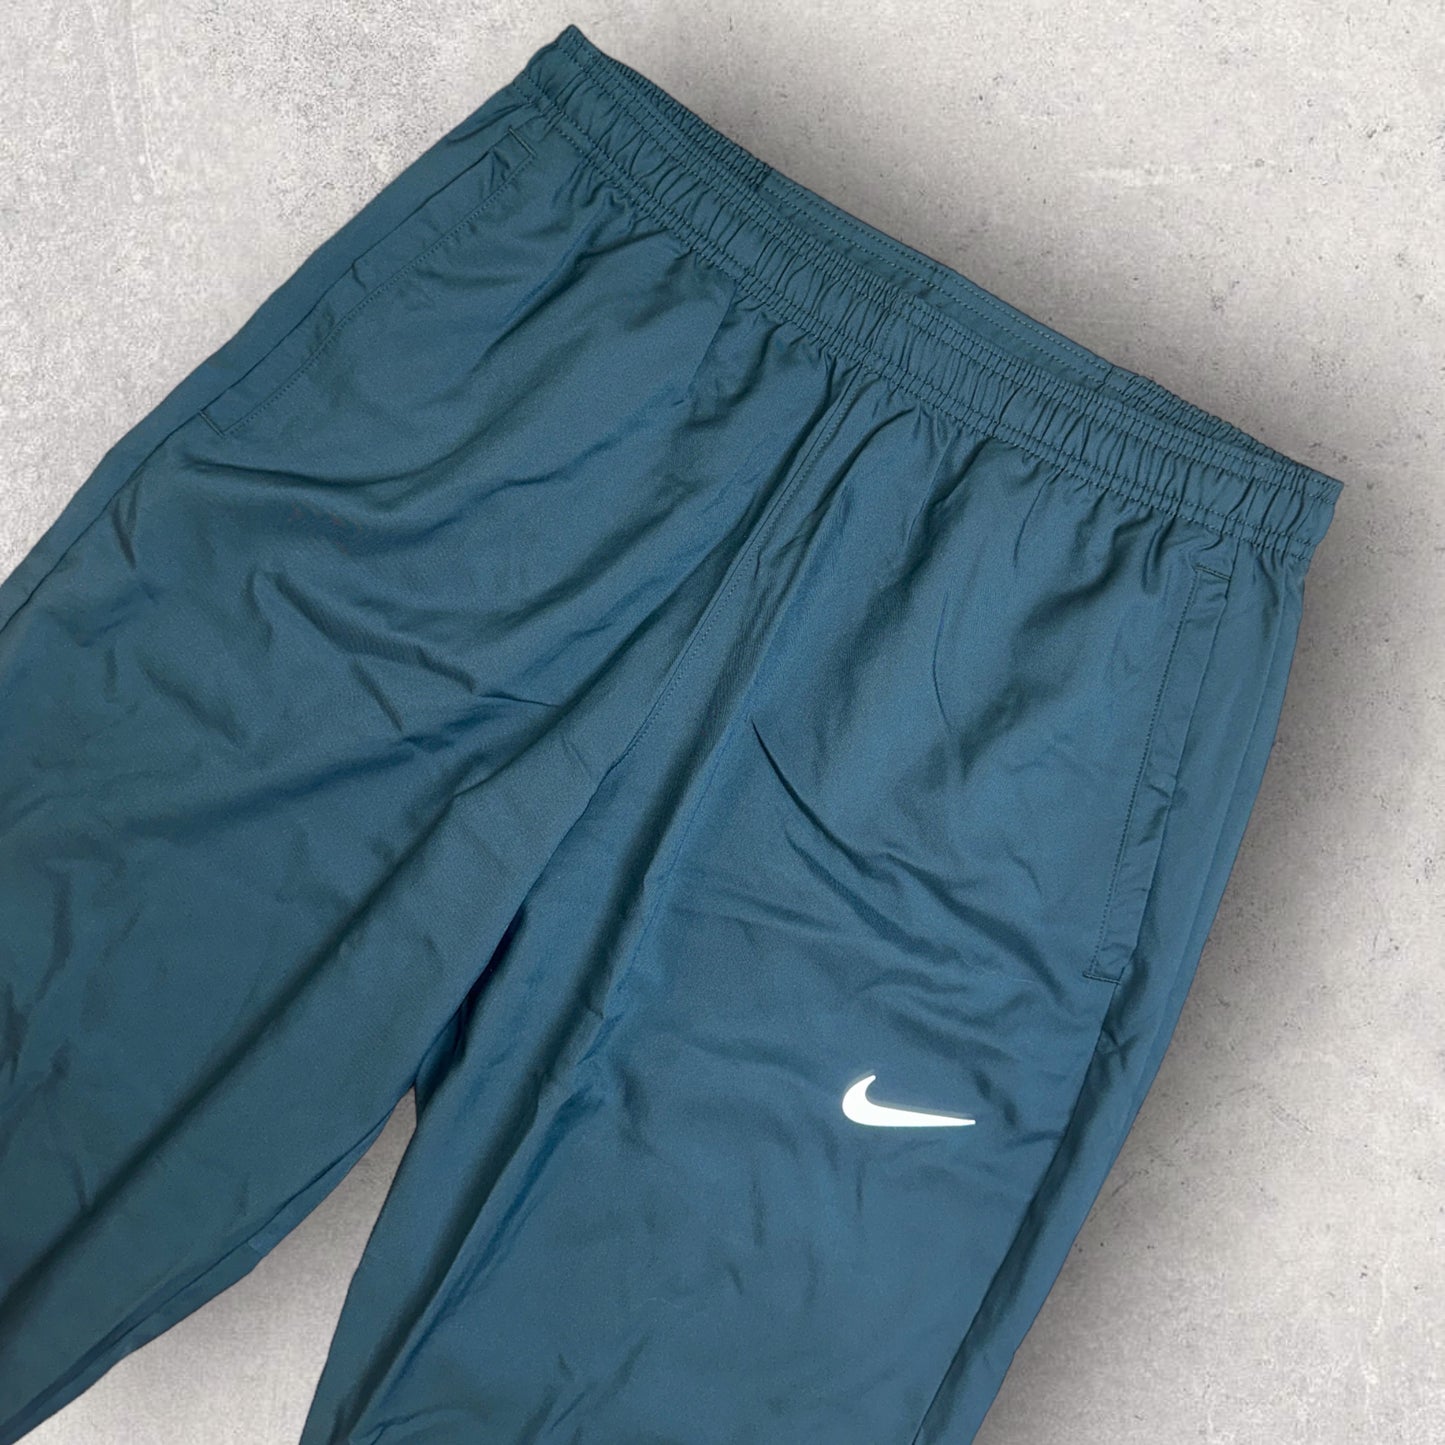 NIKE DRI-FIT CHALLENGER RUNNING JOGGERS